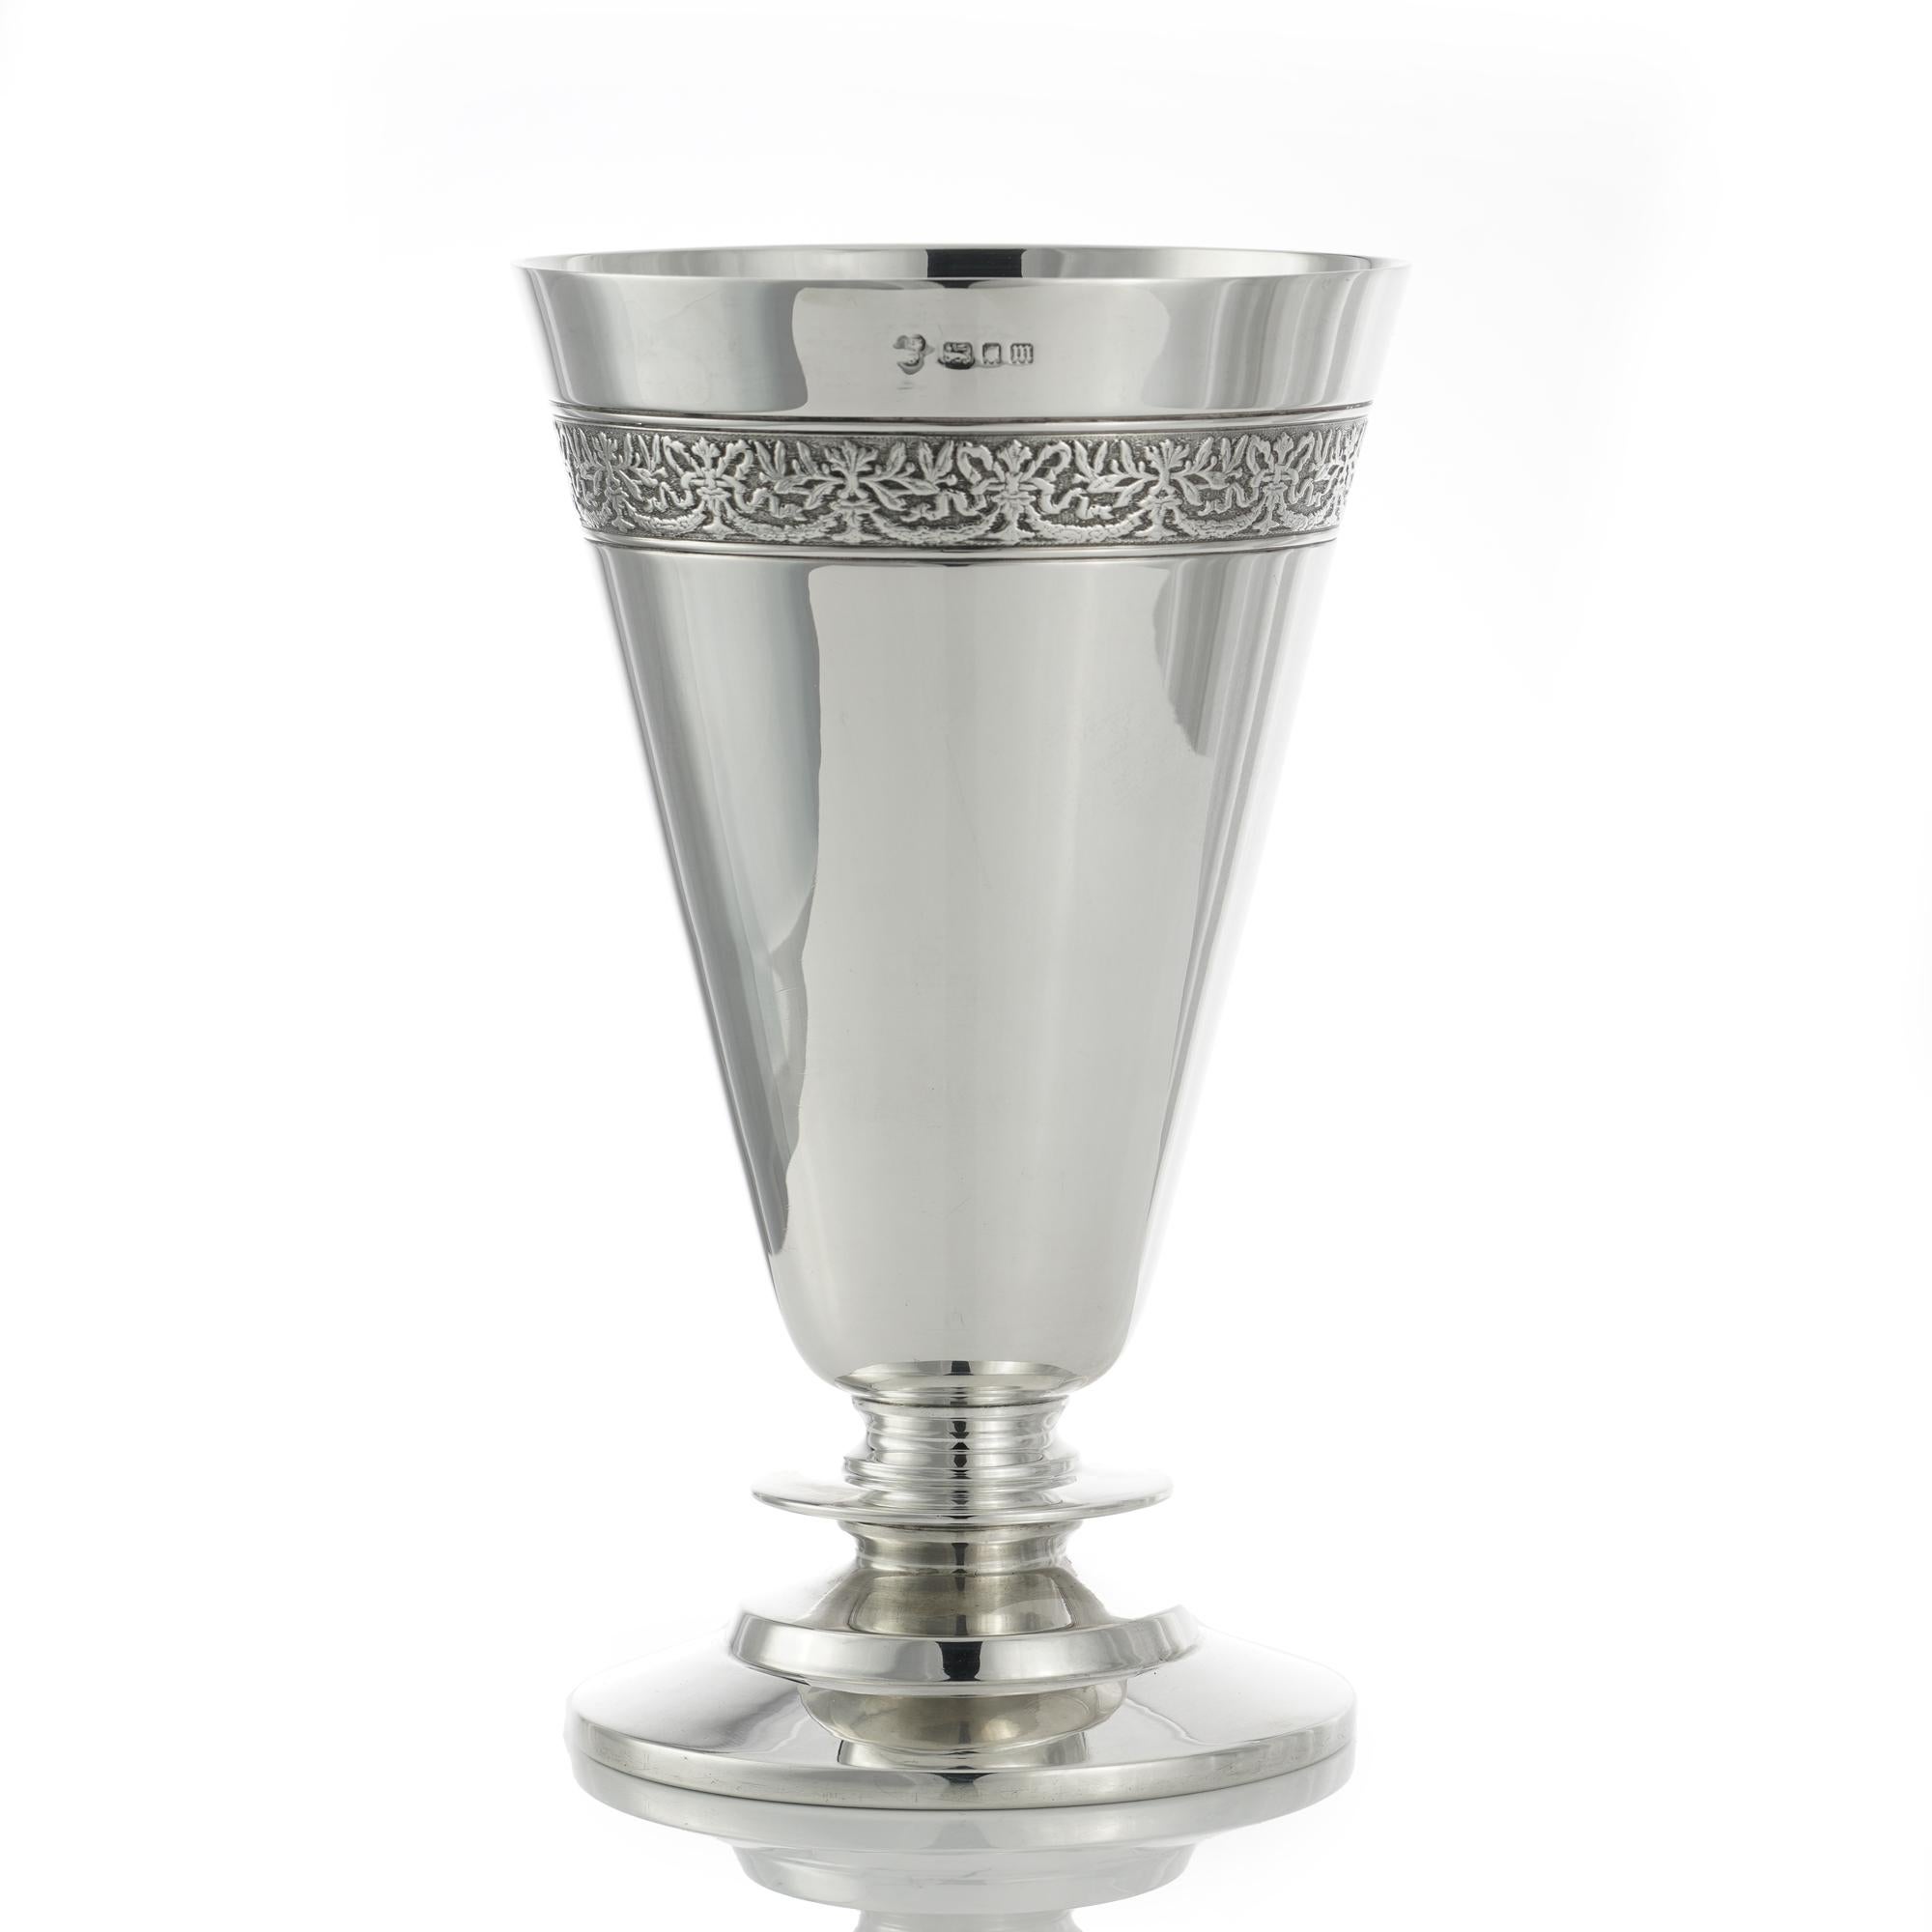 Vintage sterling silver large goblet.
Made in England, London, 1927
Maker: Charles Boyton & Son Ltd.
Fully hallmarked. 

 Approx. Dimensions - 
 Diameter x height: 11.4 x 18.8 cm 
 Weight: 380 grams in total. 

 Condition: Goblet is general